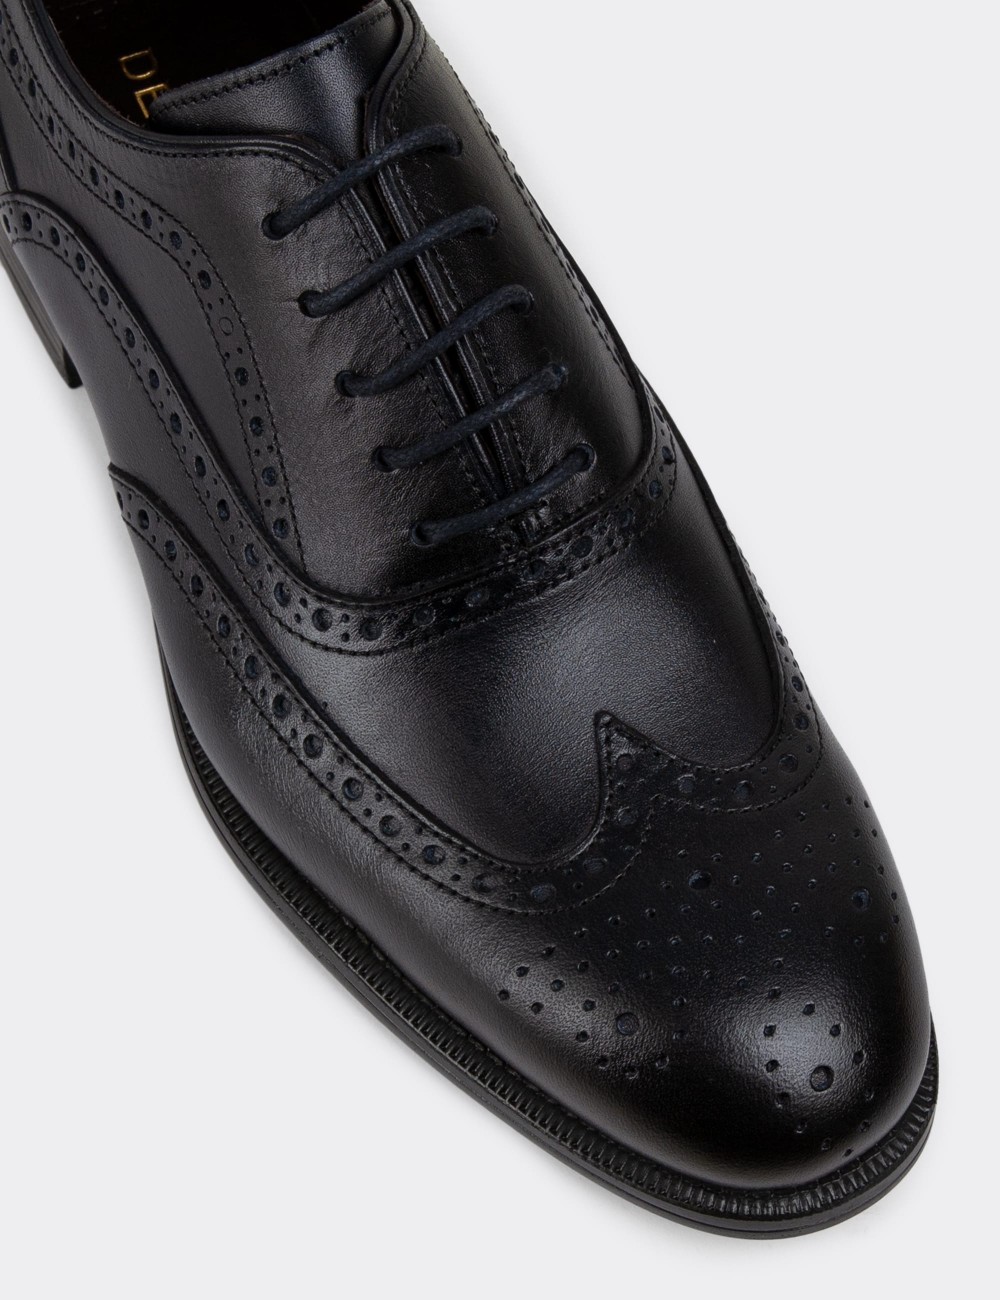 Navy Leather Classic Shoes - 01511MLCVC01